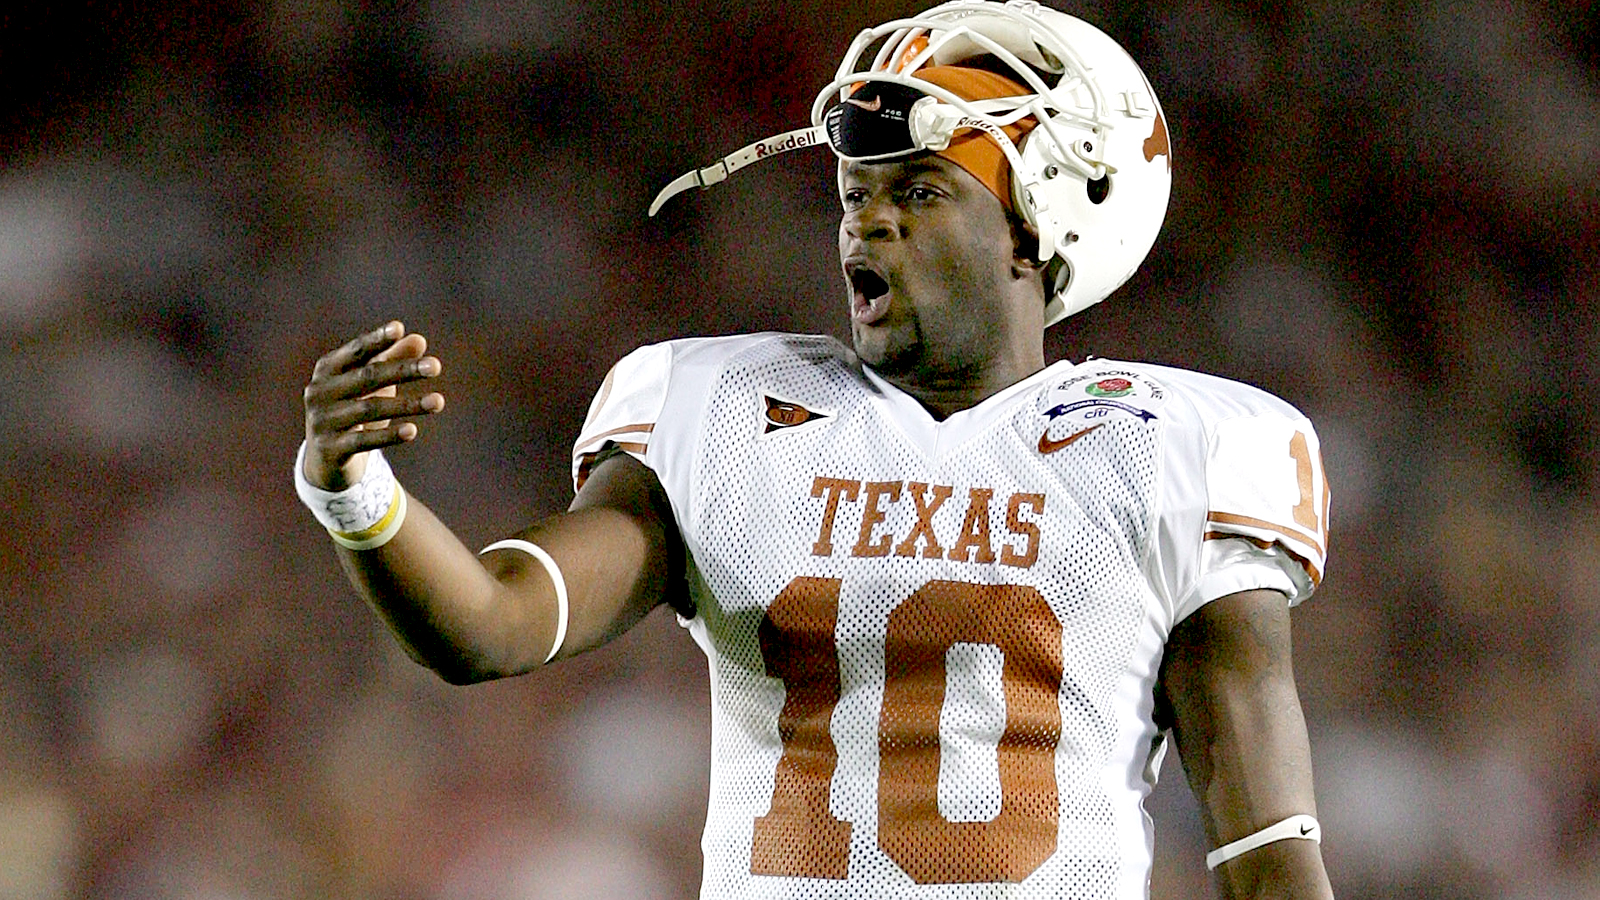 When Vince Young is done trying for NFL, Texas has 'great job' | FOX Sports